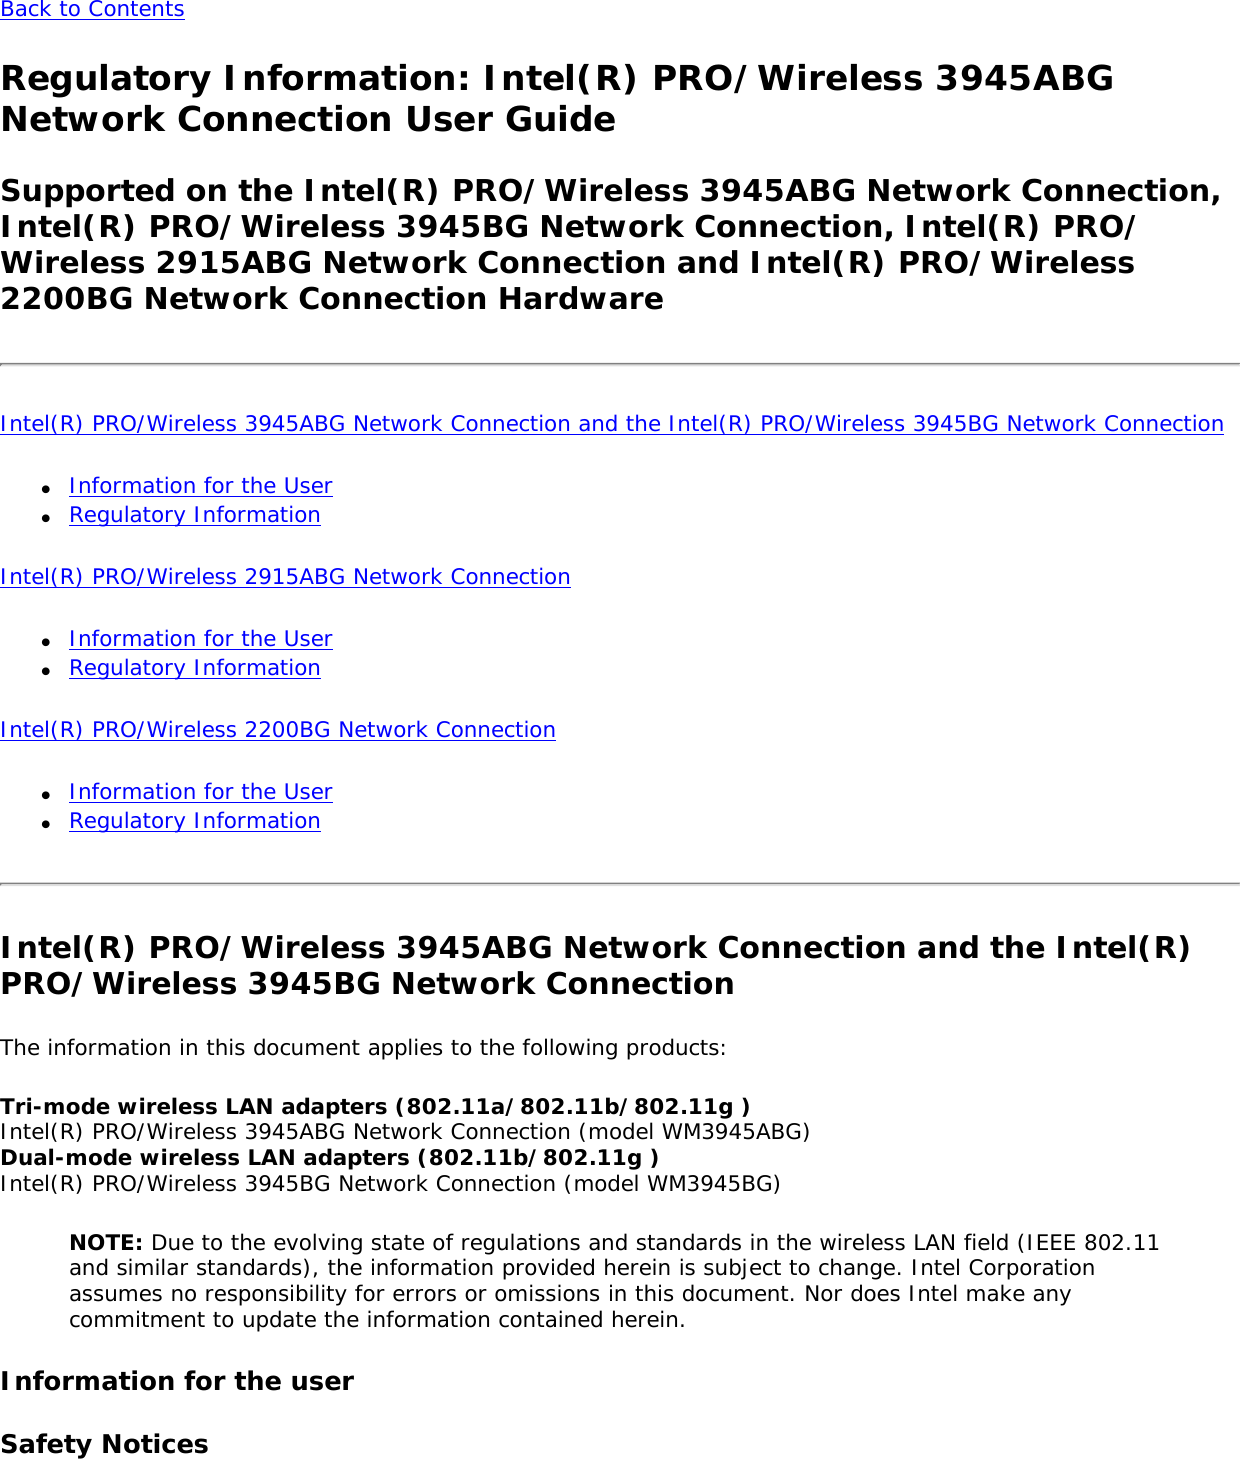 Back to Contents Regulatory Information: Intel(R) PRO/Wireless 3945ABG Network Connection User GuideSupported on the Intel(R) PRO/Wireless 3945ABG Network Connection, Intel(R) PRO/Wireless 3945BG Network Connection, Intel(R) PRO/Wireless 2915ABG Network Connection and Intel(R) PRO/Wireless 2200BG Network Connection Hardware Intel(R) PRO/Wireless 3945ABG Network Connection and the Intel(R) PRO/Wireless 3945BG Network Connection ●     Information for the User ●     Regulatory InformationIntel(R) PRO/Wireless 2915ABG Network Connection ●     Information for the User●     Regulatory Information Intel(R) PRO/Wireless 2200BG Network Connection ●     Information for the User ●     Regulatory Information Intel(R) PRO/Wireless 3945ABG Network Connection and the Intel(R) PRO/Wireless 3945BG Network ConnectionThe information in this document applies to the following products: Tri-mode wireless LAN adapters (802.11a/802.11b/802.11g ) Intel(R) PRO/Wireless 3945ABG Network Connection (model WM3945ABG)  Dual-mode wireless LAN adapters (802.11b/802.11g ) Intel(R) PRO/Wireless 3945BG Network Connection (model WM3945BG) NOTE: Due to the evolving state of regulations and standards in the wireless LAN field (IEEE 802.11 and similar standards), the information provided herein is subject to change. Intel Corporation assumes no responsibility for errors or omissions in this document. Nor does Intel make any commitment to update the information contained herein. Information for the userSafety Notices